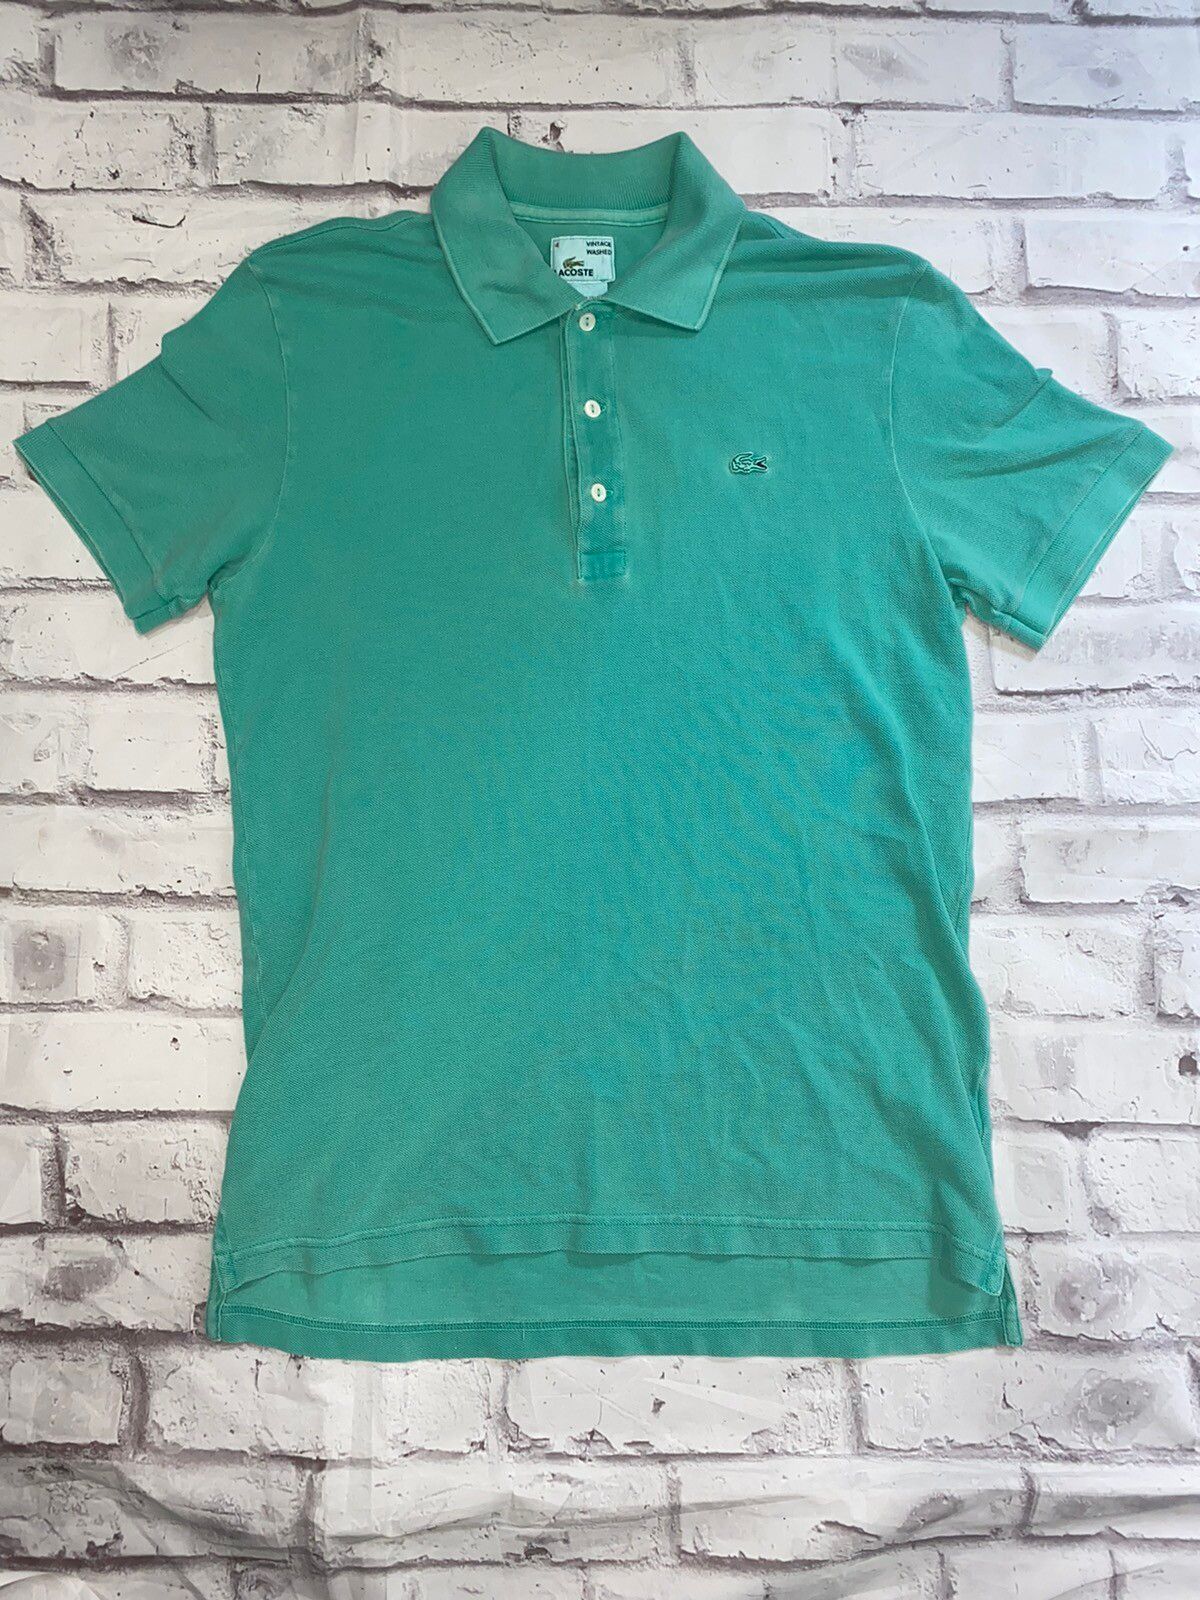 Lacoste Lacoste Vintage Washed Polo Medium Size US M / EU 48-50 / 2 - 1 Preview